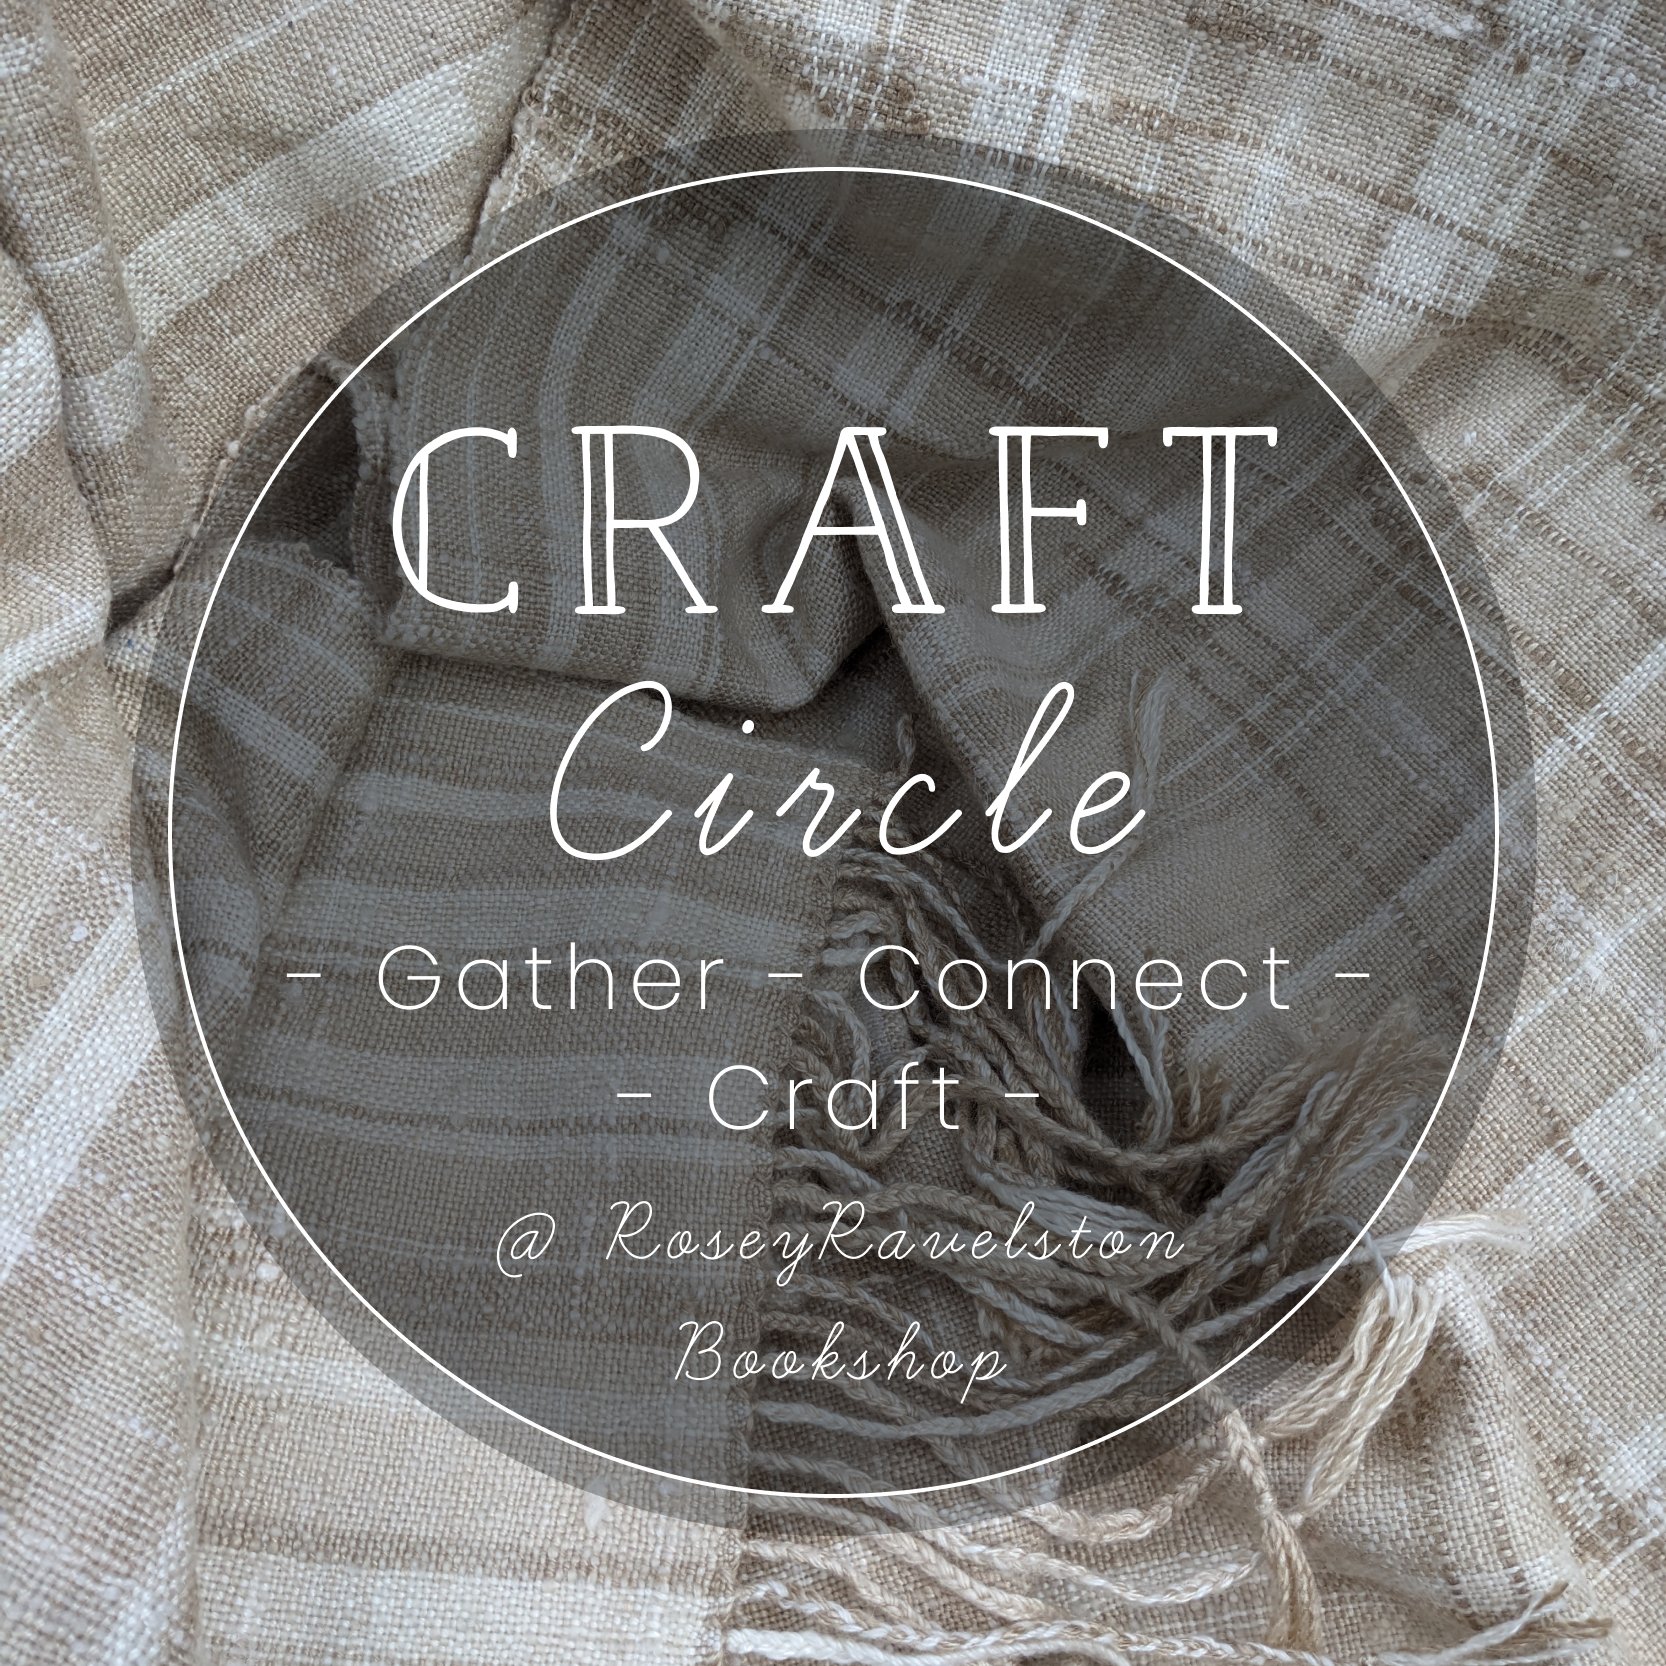 One week until our next Craft Circle! Join us Saturday 20 at 6 pm at @roseyravelstonbooks. All crafts and crafters welcome! 

Find out more www.lyttletonstores.com.au/craft-circle

#lyttletonstores #workshops #classesandevents #mtnsmade #bluemountain